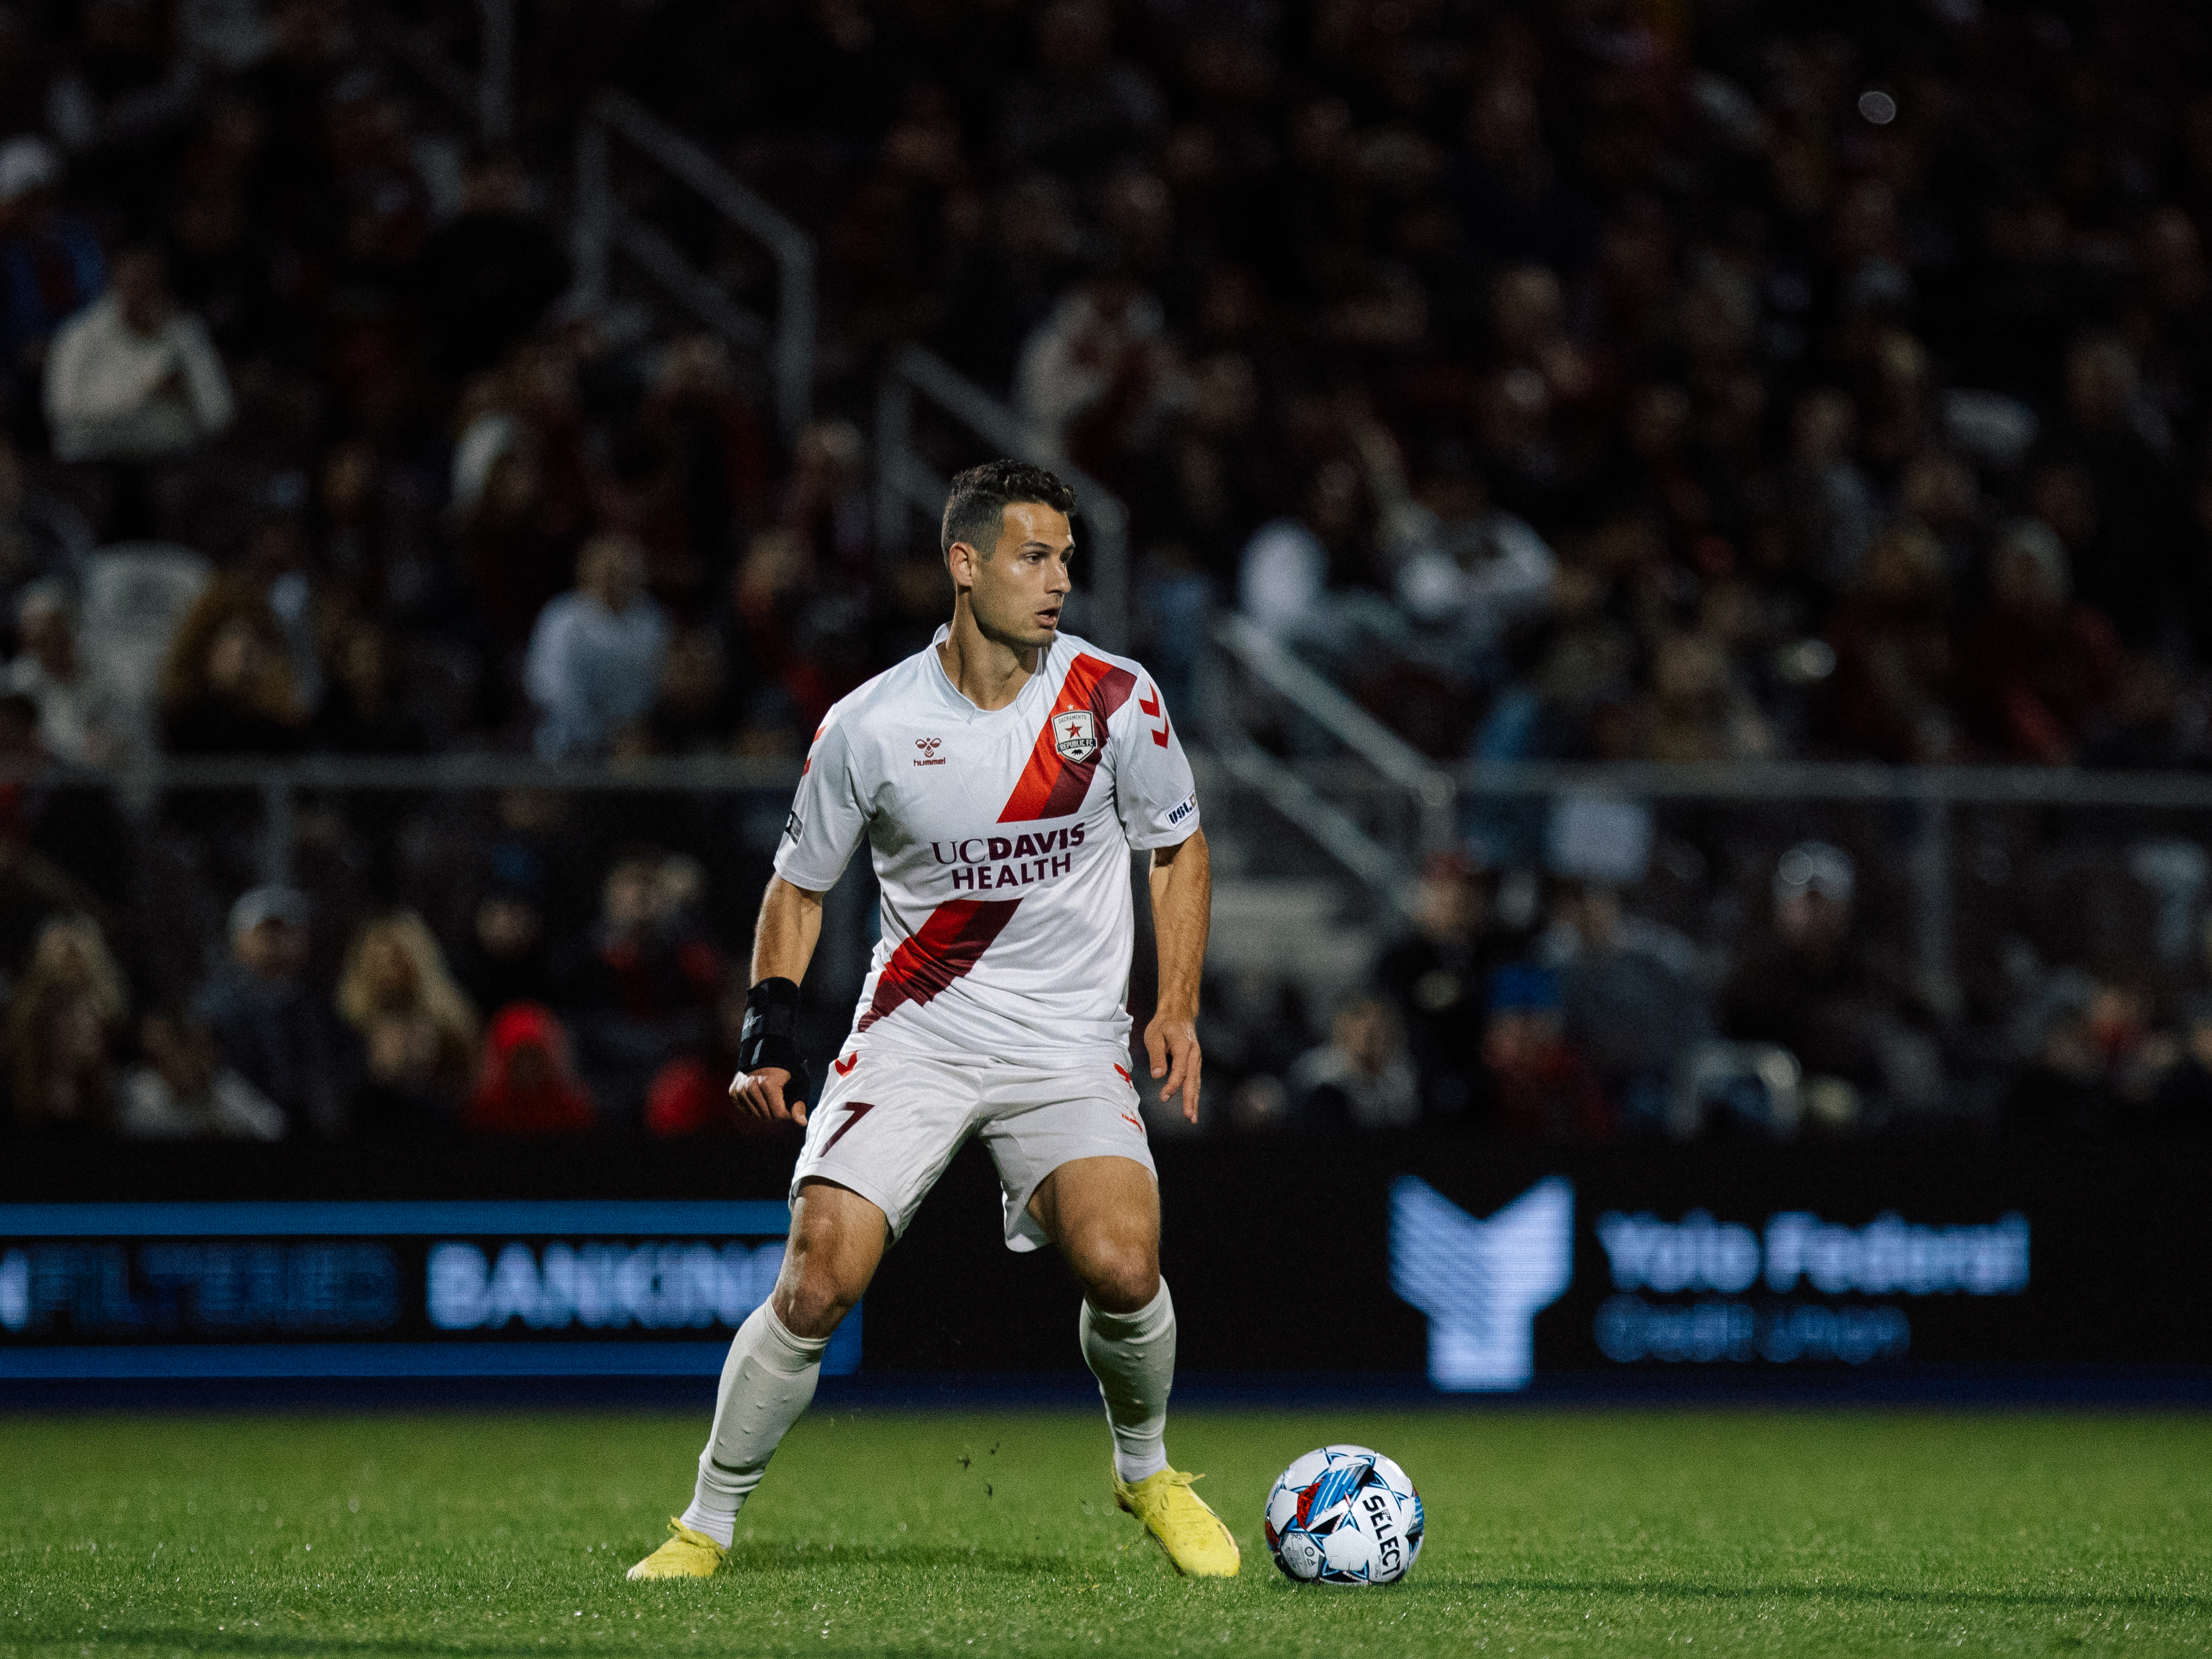 Match Preview: Republic FC at Indy Eleven featured image